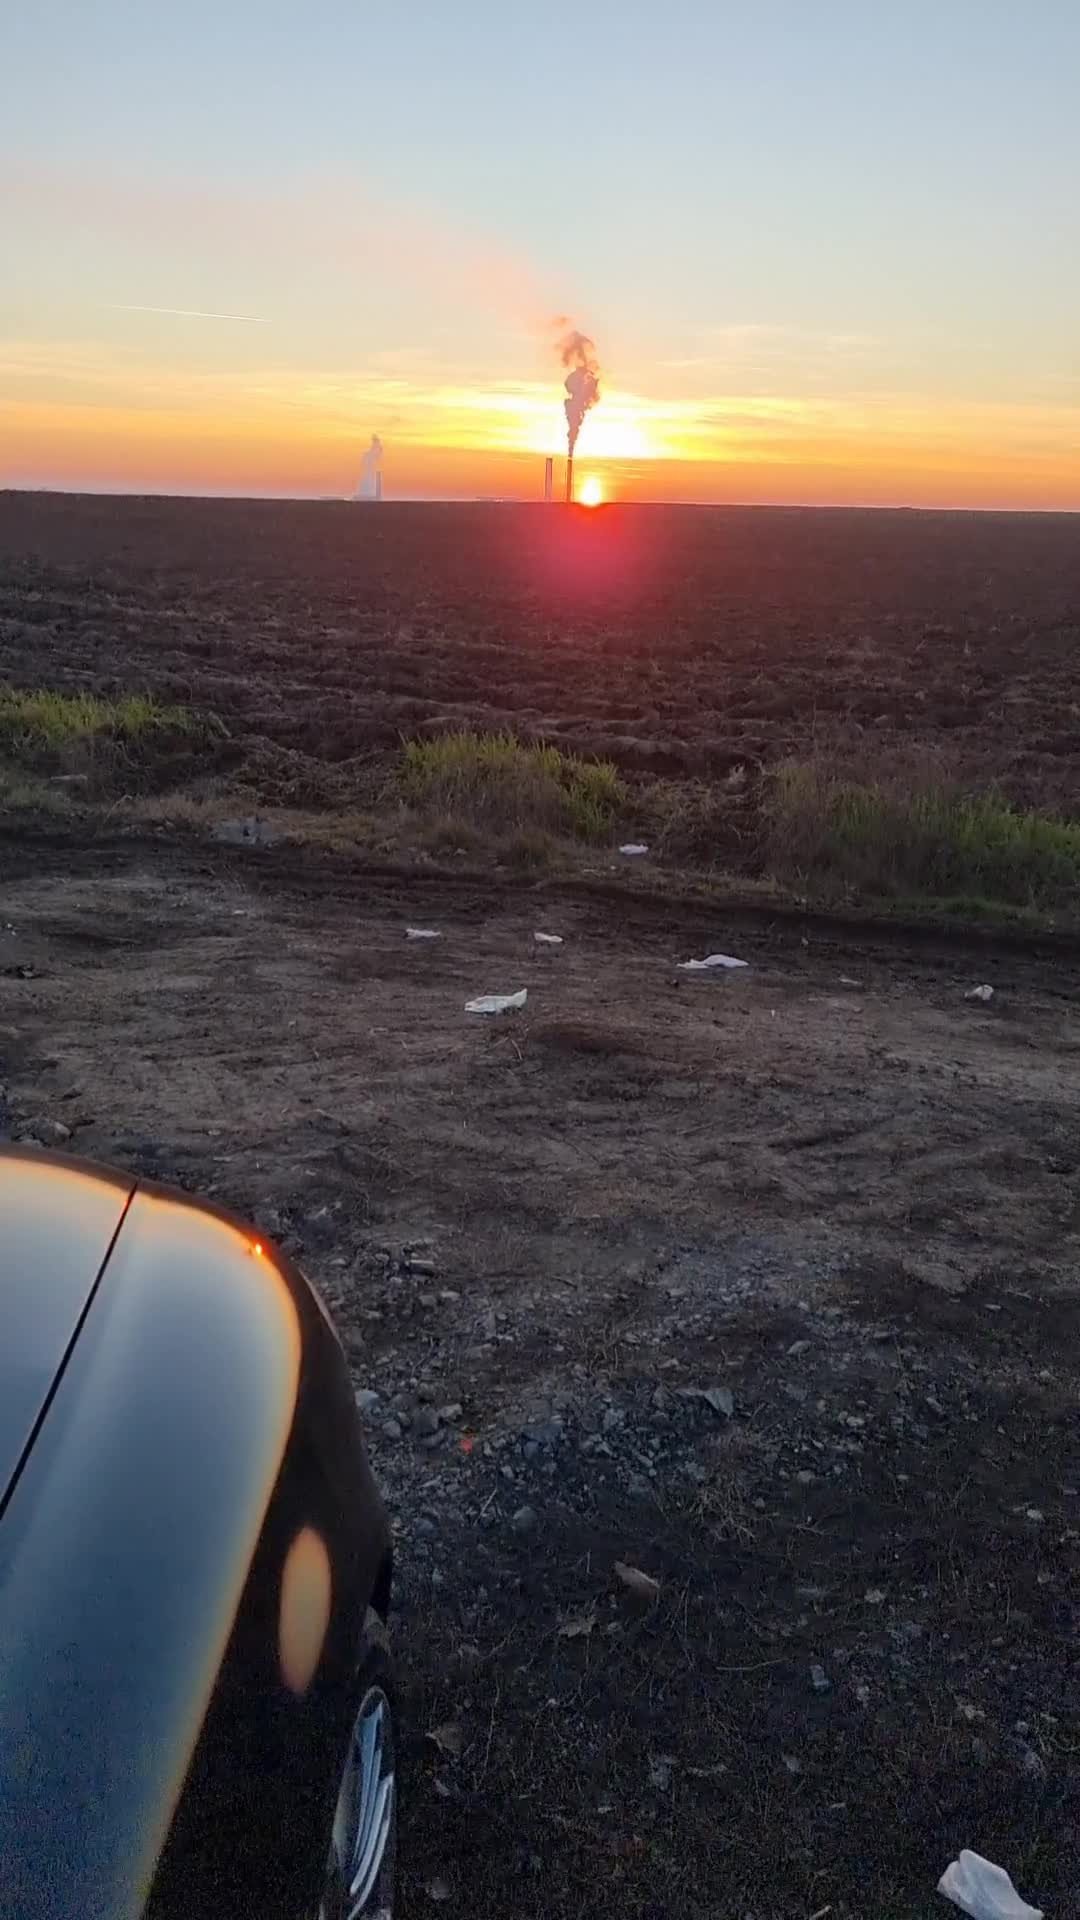 Video by Ada with the username @Virtualfantasydream, who is a star user,  March 16, 2024 at 9:40 AM. The post is about the topic MILF and the text says 'He took me outside the city to see the sunset together.😍 I thought it was going to be something romantic but he just wanted to give him a blowjob, I obeyed 🙈
https://onlyfans.com/adavirtual'